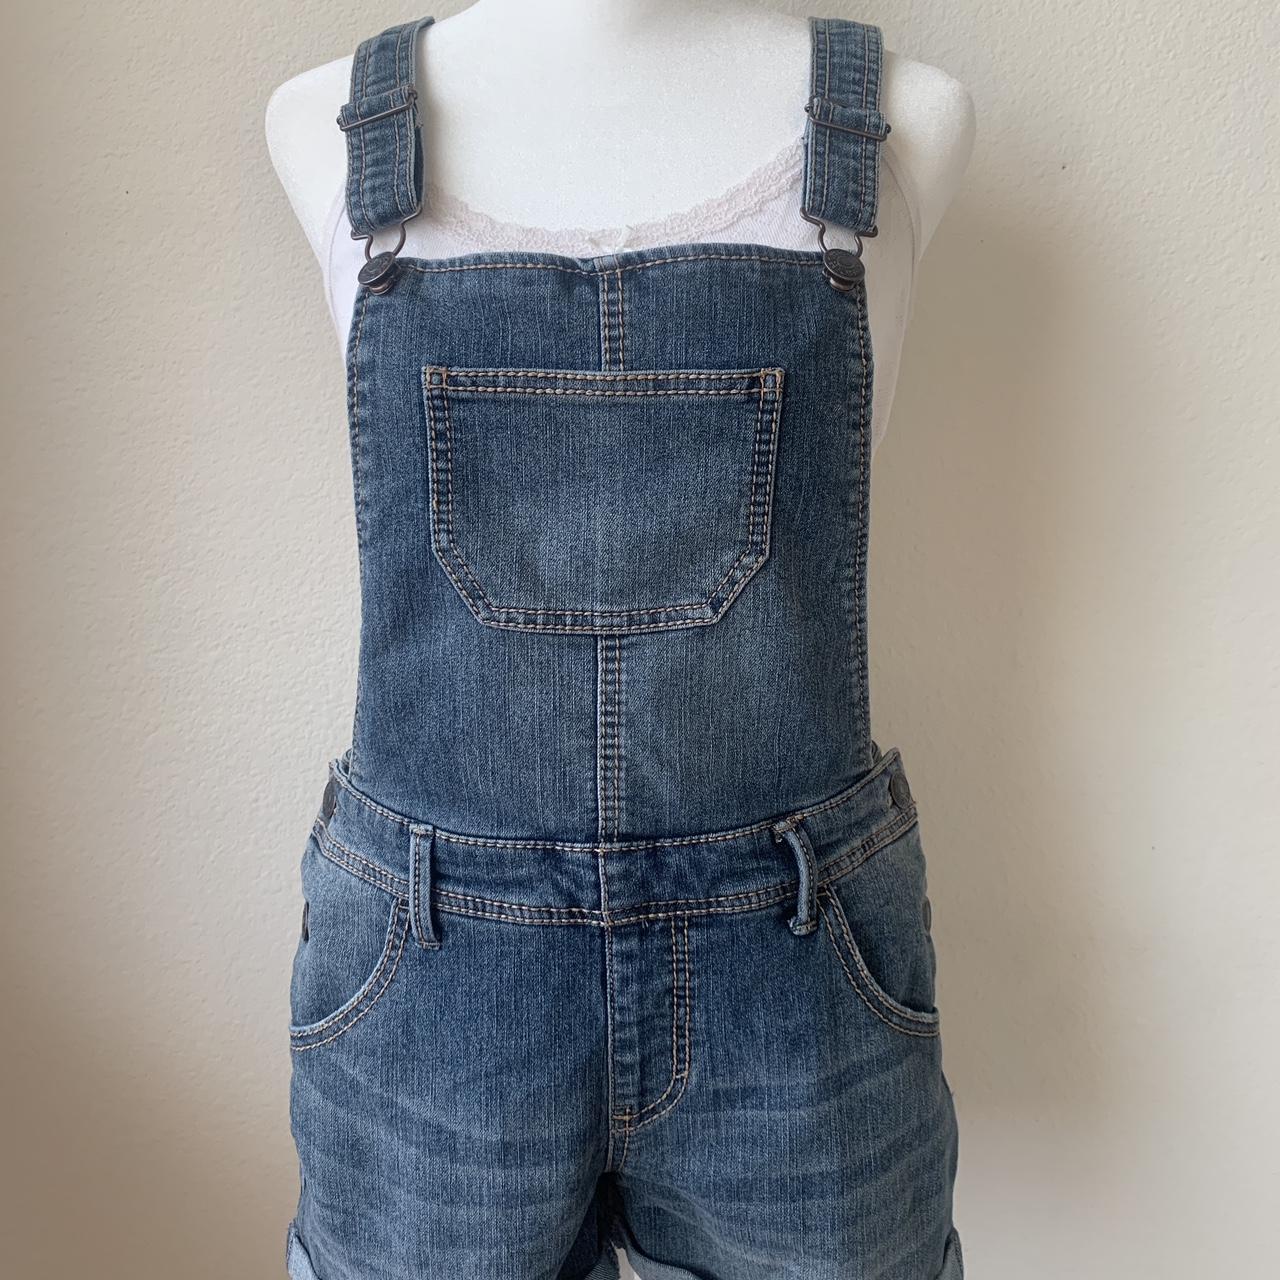 Adorable Pointer Brand Kids Overalls! Made in USA - Depop